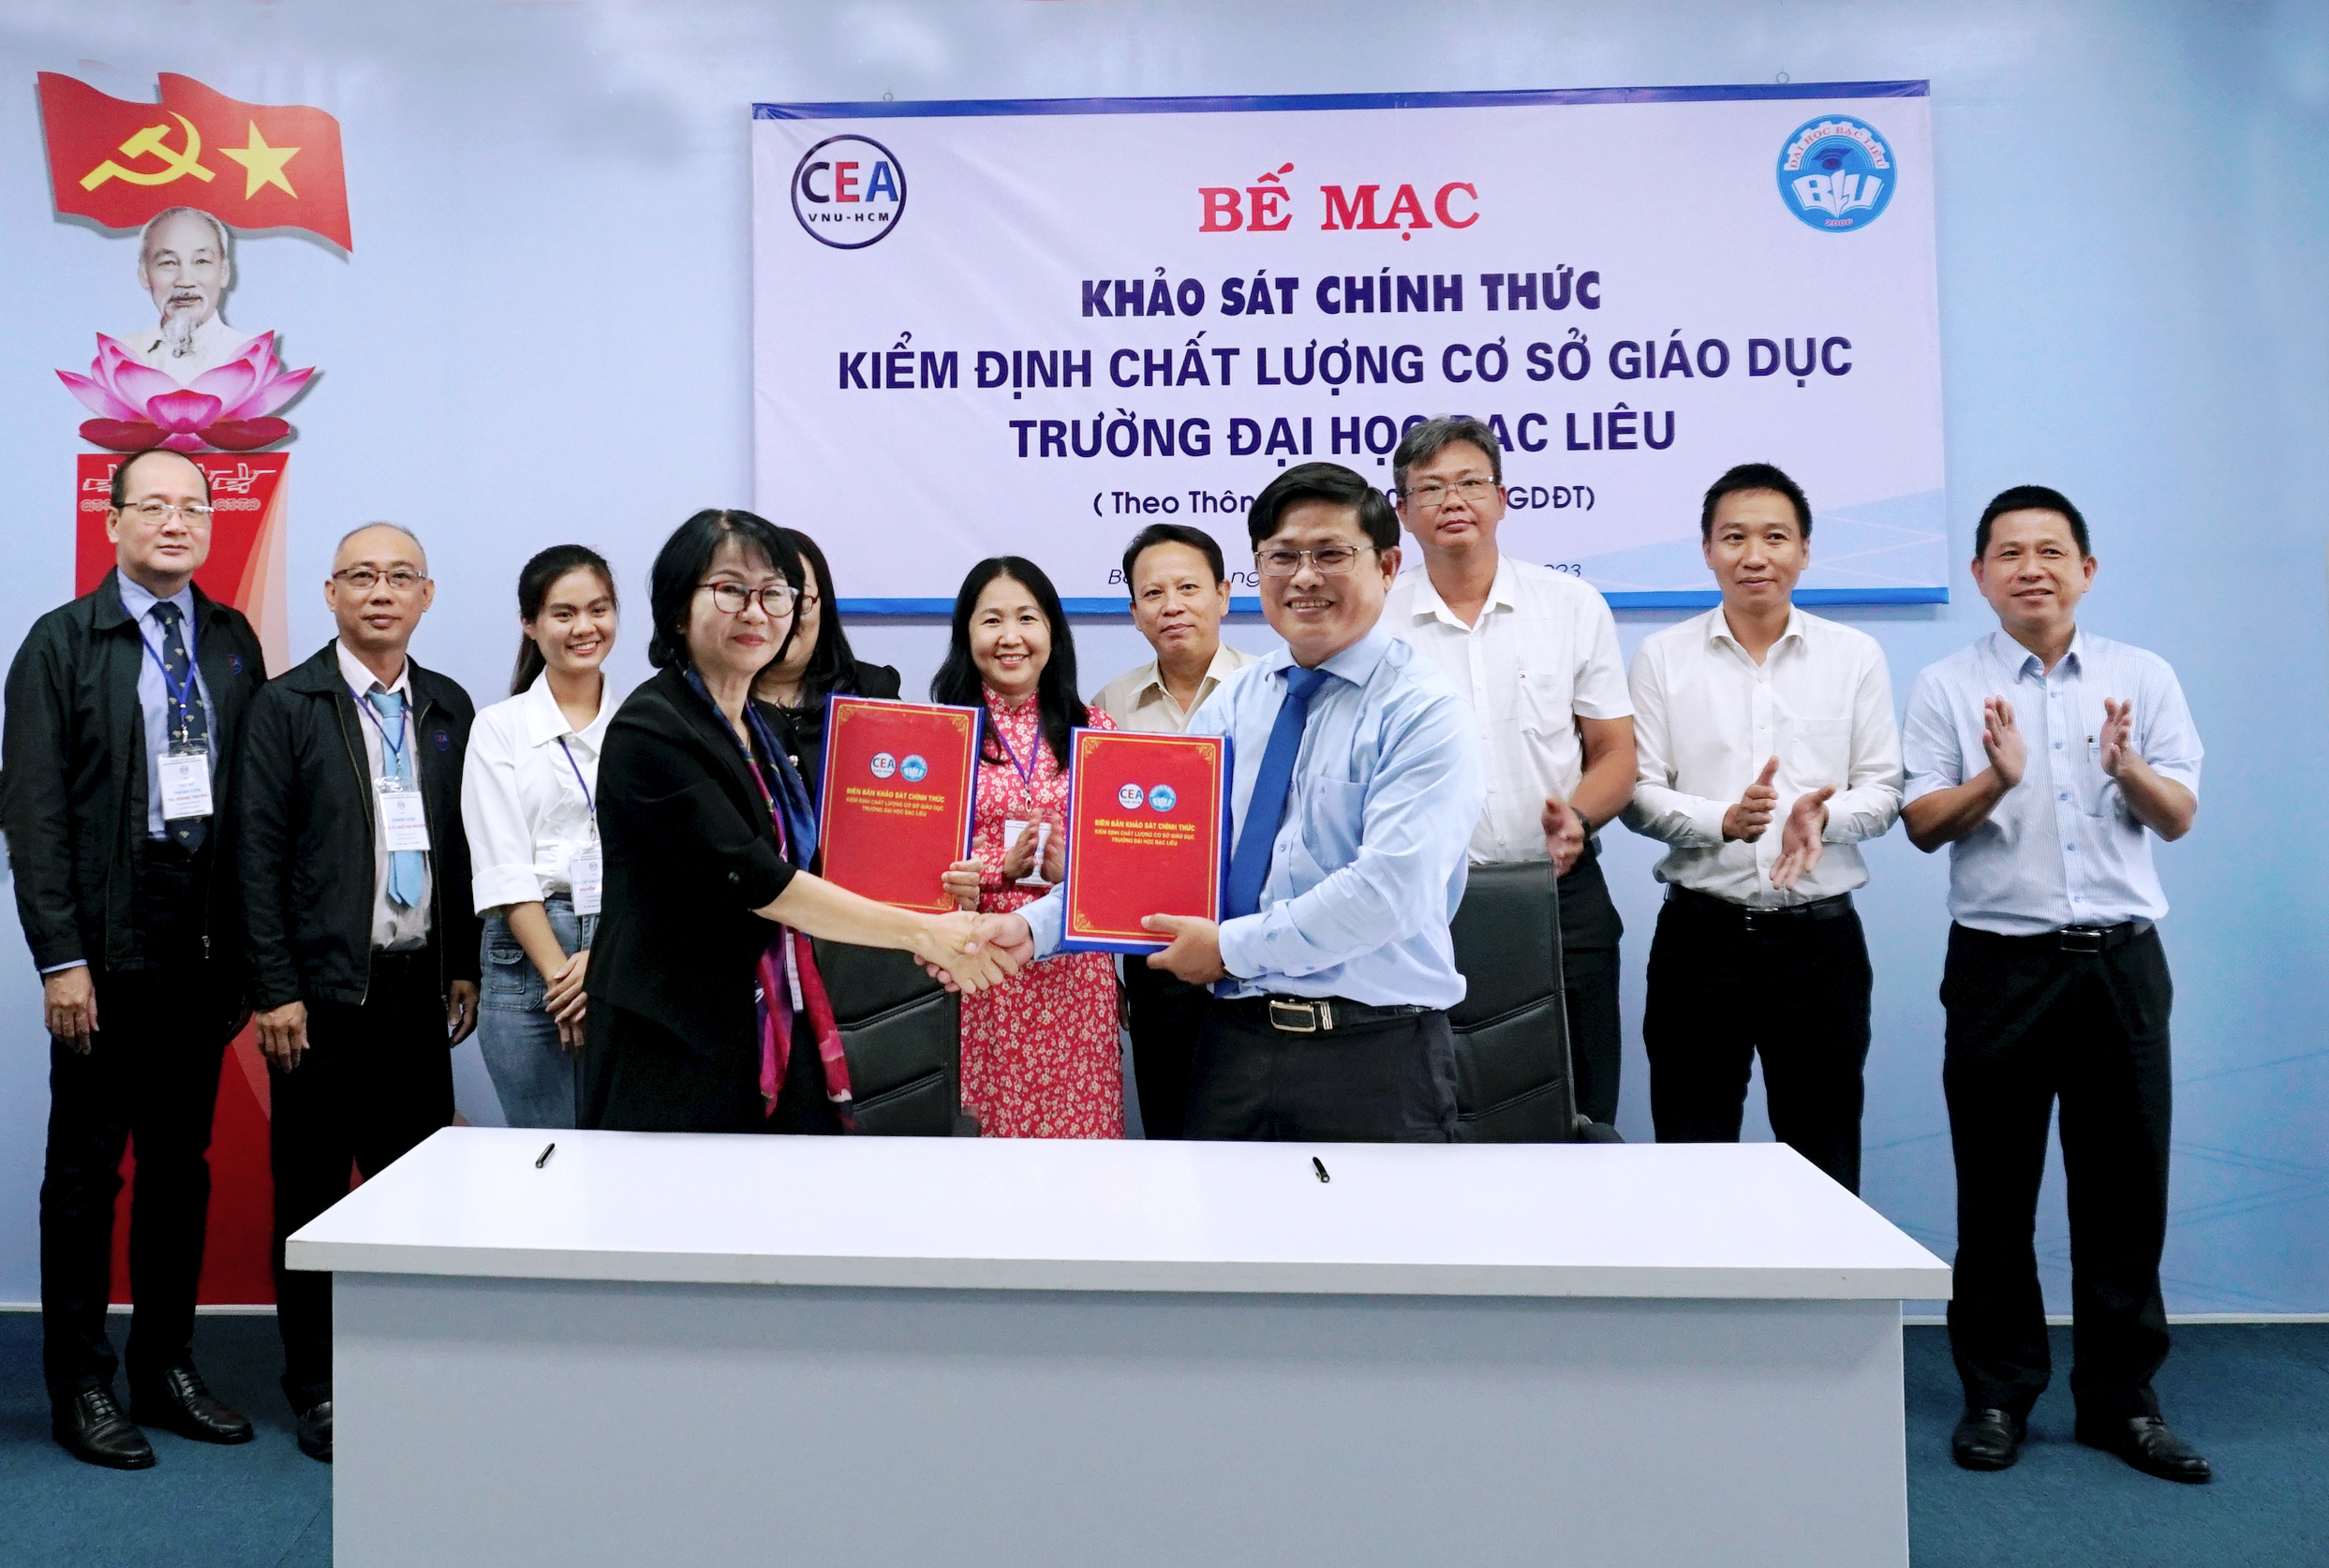 Closing ceremony of the official educational facilities survey to certify the quality of  at Bac Lieu University